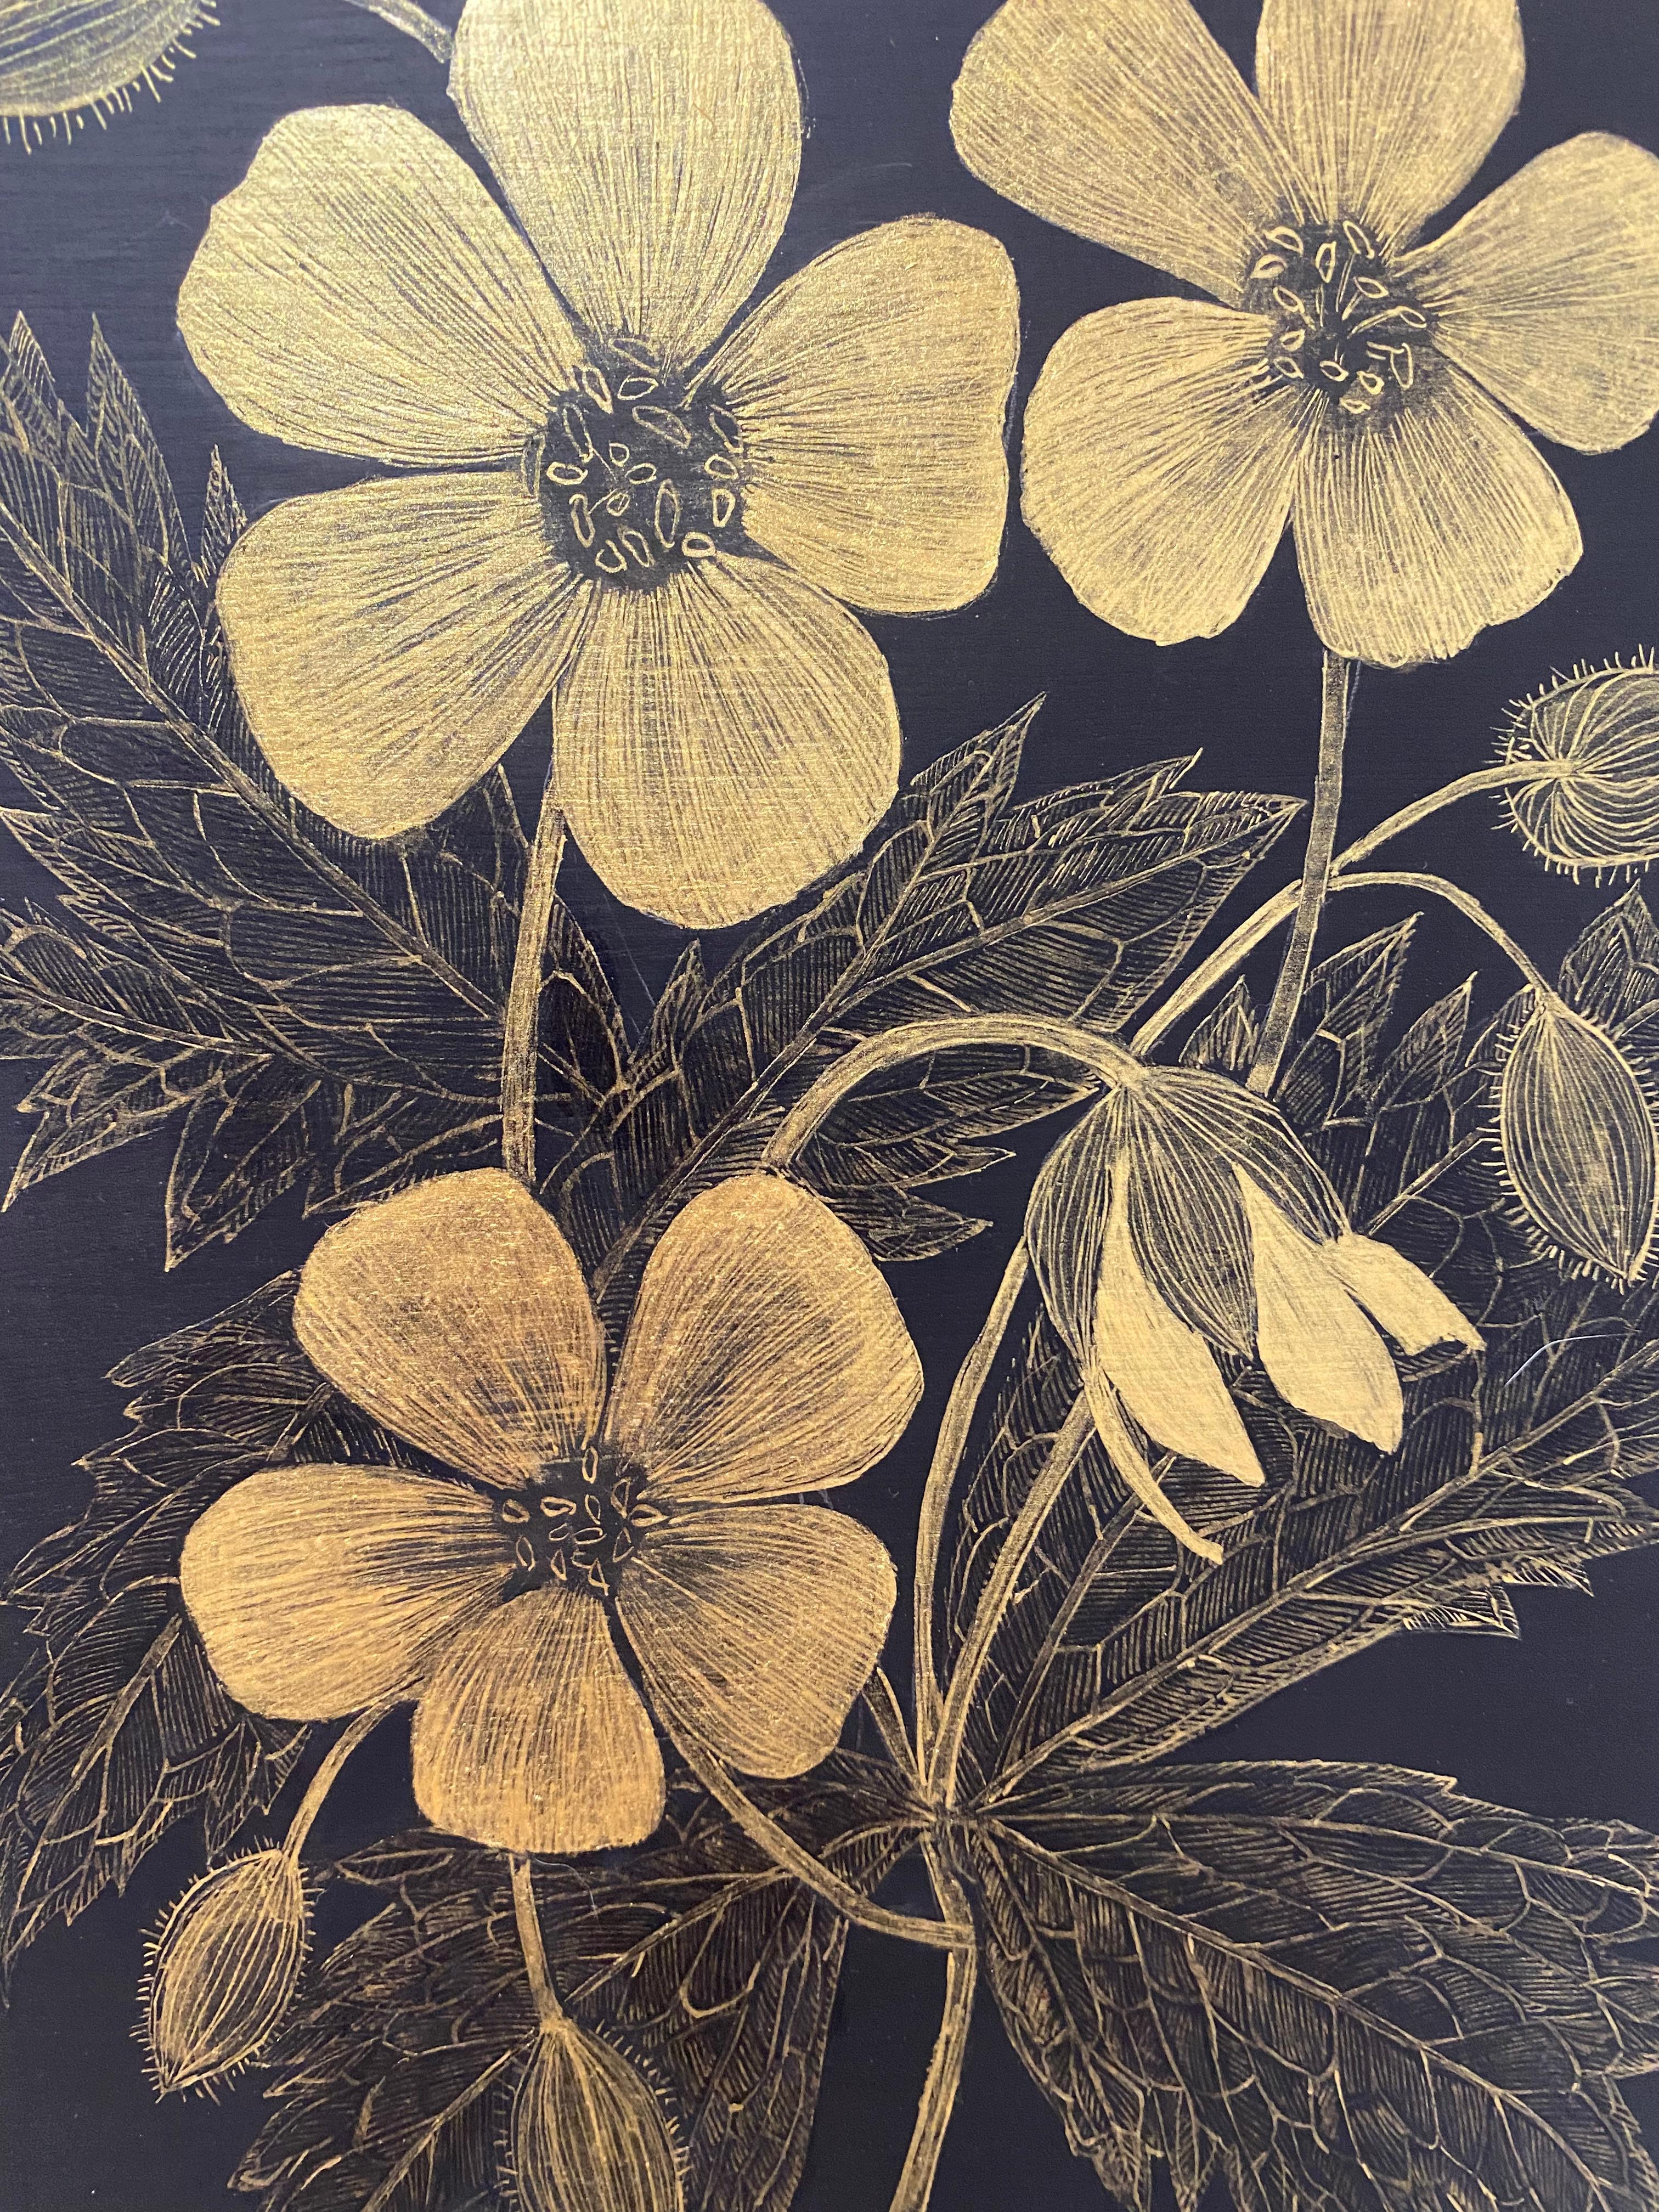 Wild Geranium Two, Botanical Painting Black Panel, Gold Flowers, Leaves, Stem For Sale 5